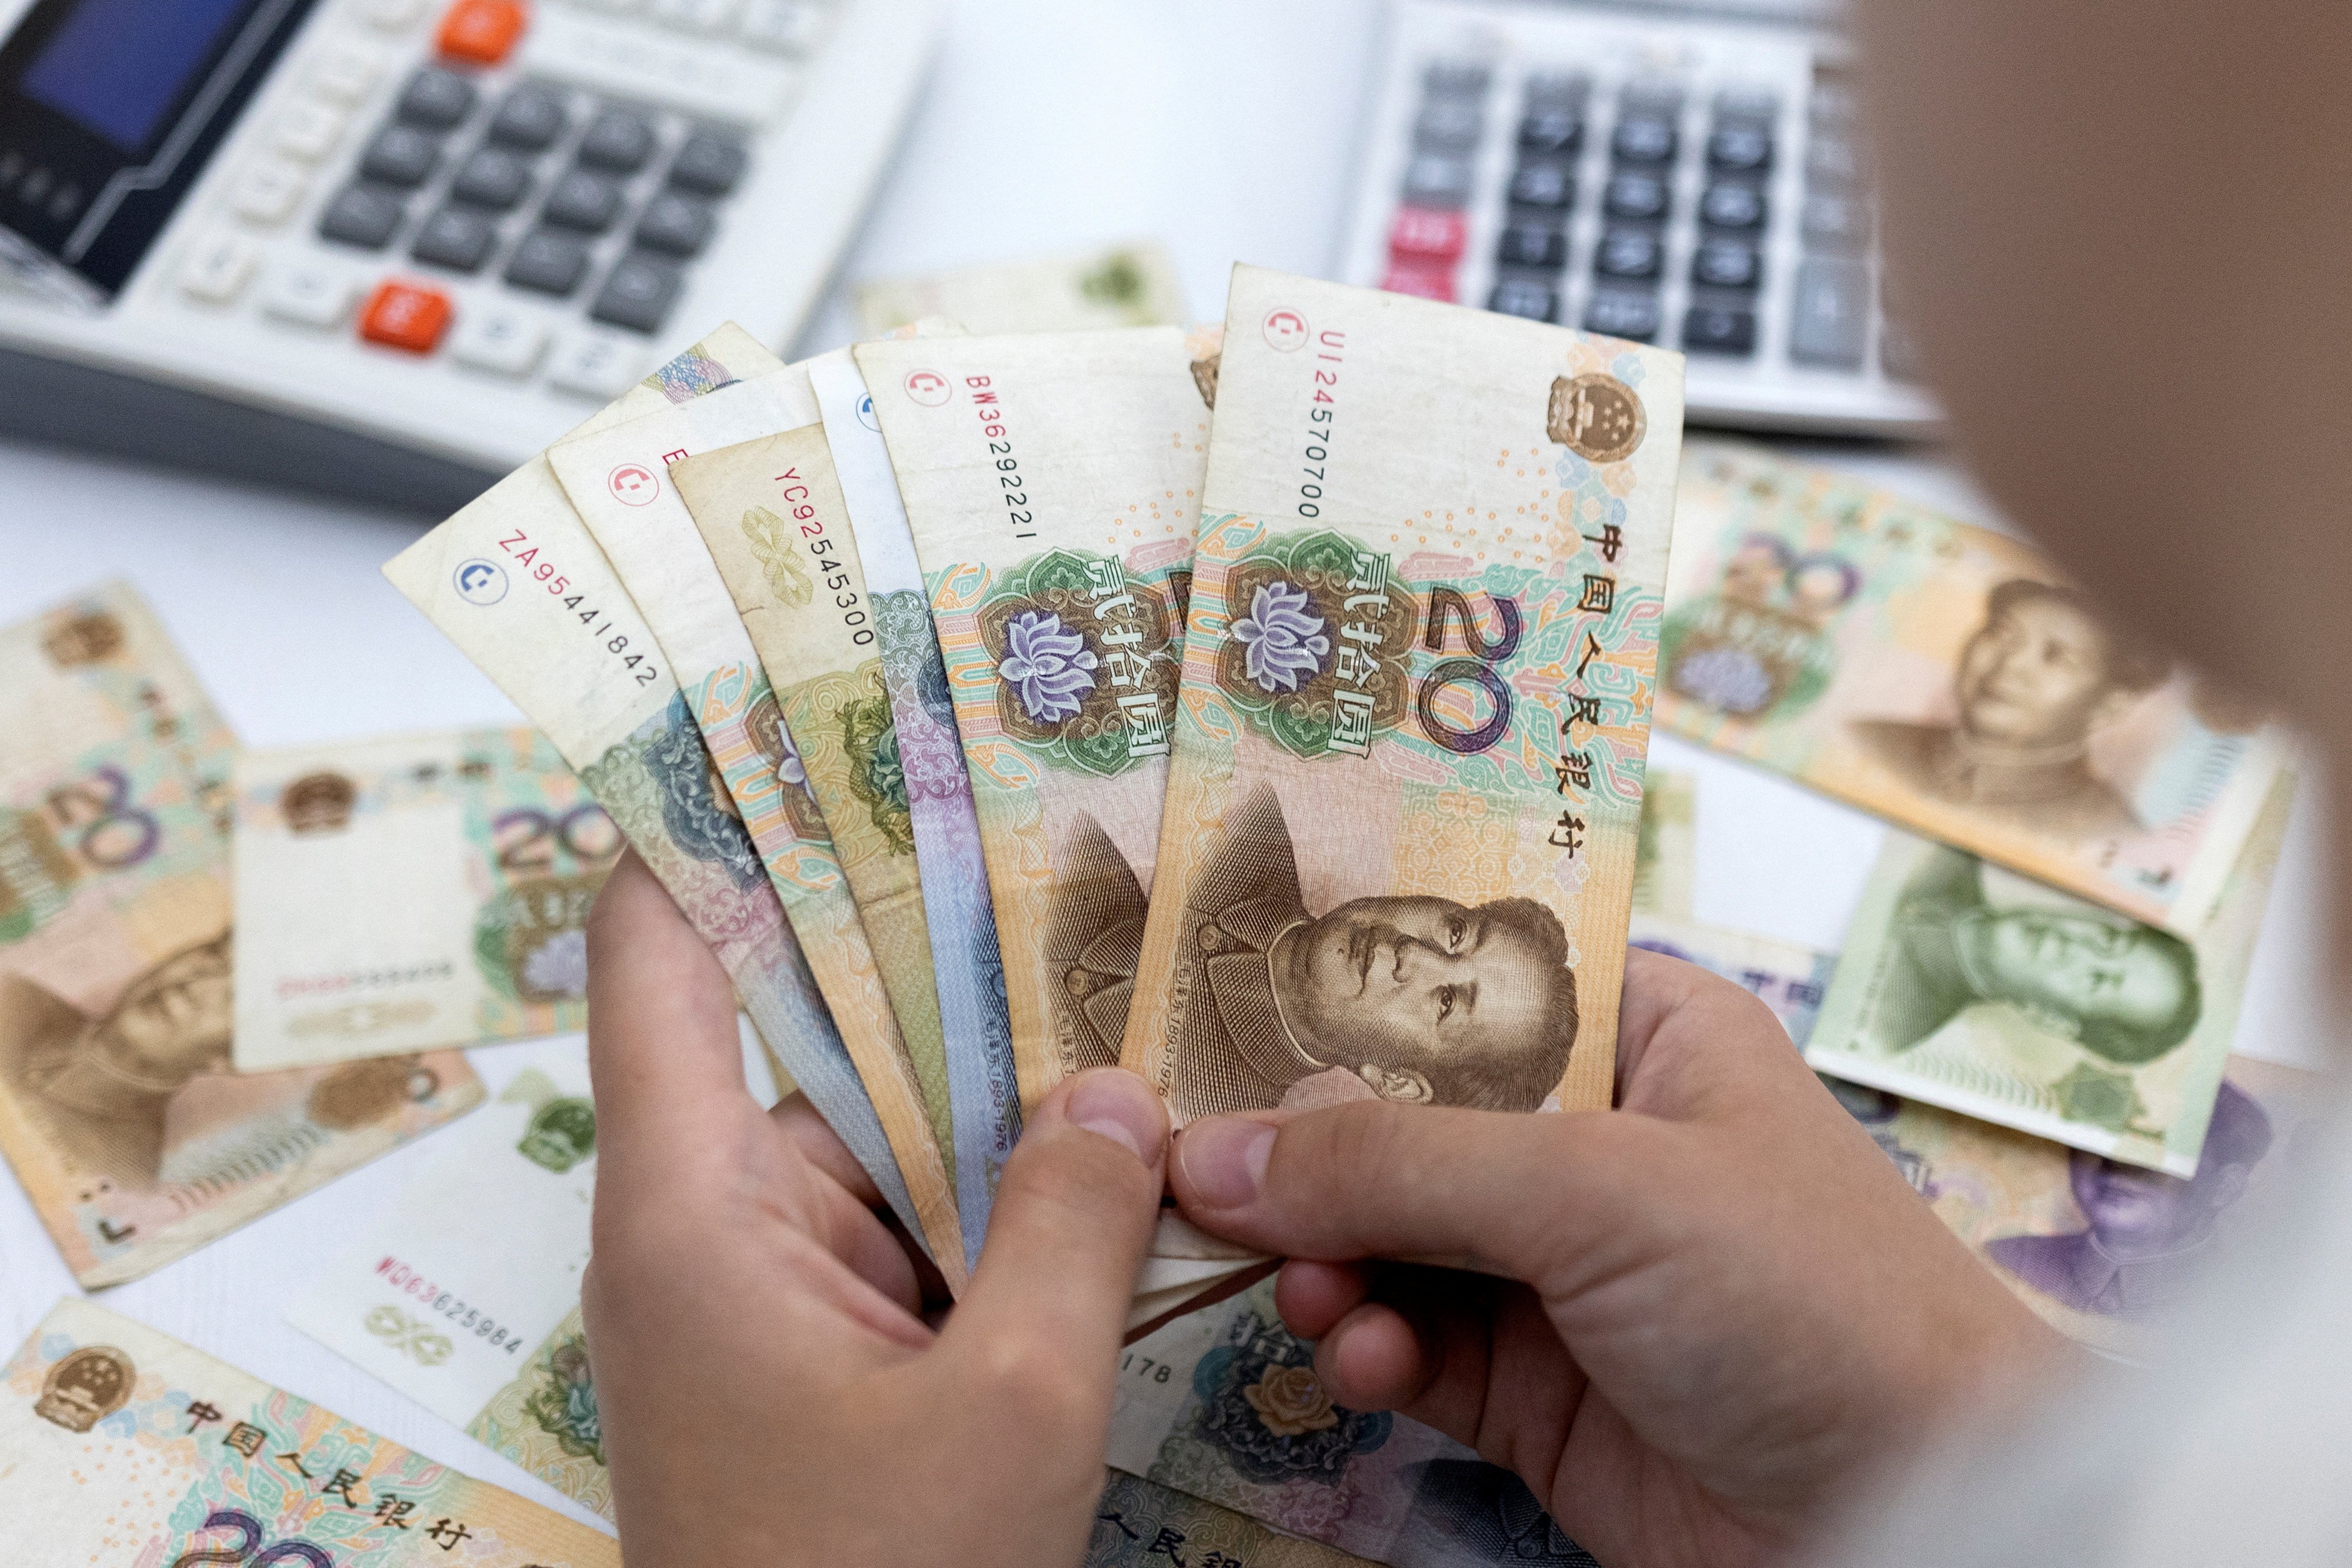 Markets are taking seriously the prospect of a surprise devaluation of the yuan as China’s persistent cyclical and structural economic woes put pressure on the currency. Photo: Reuters